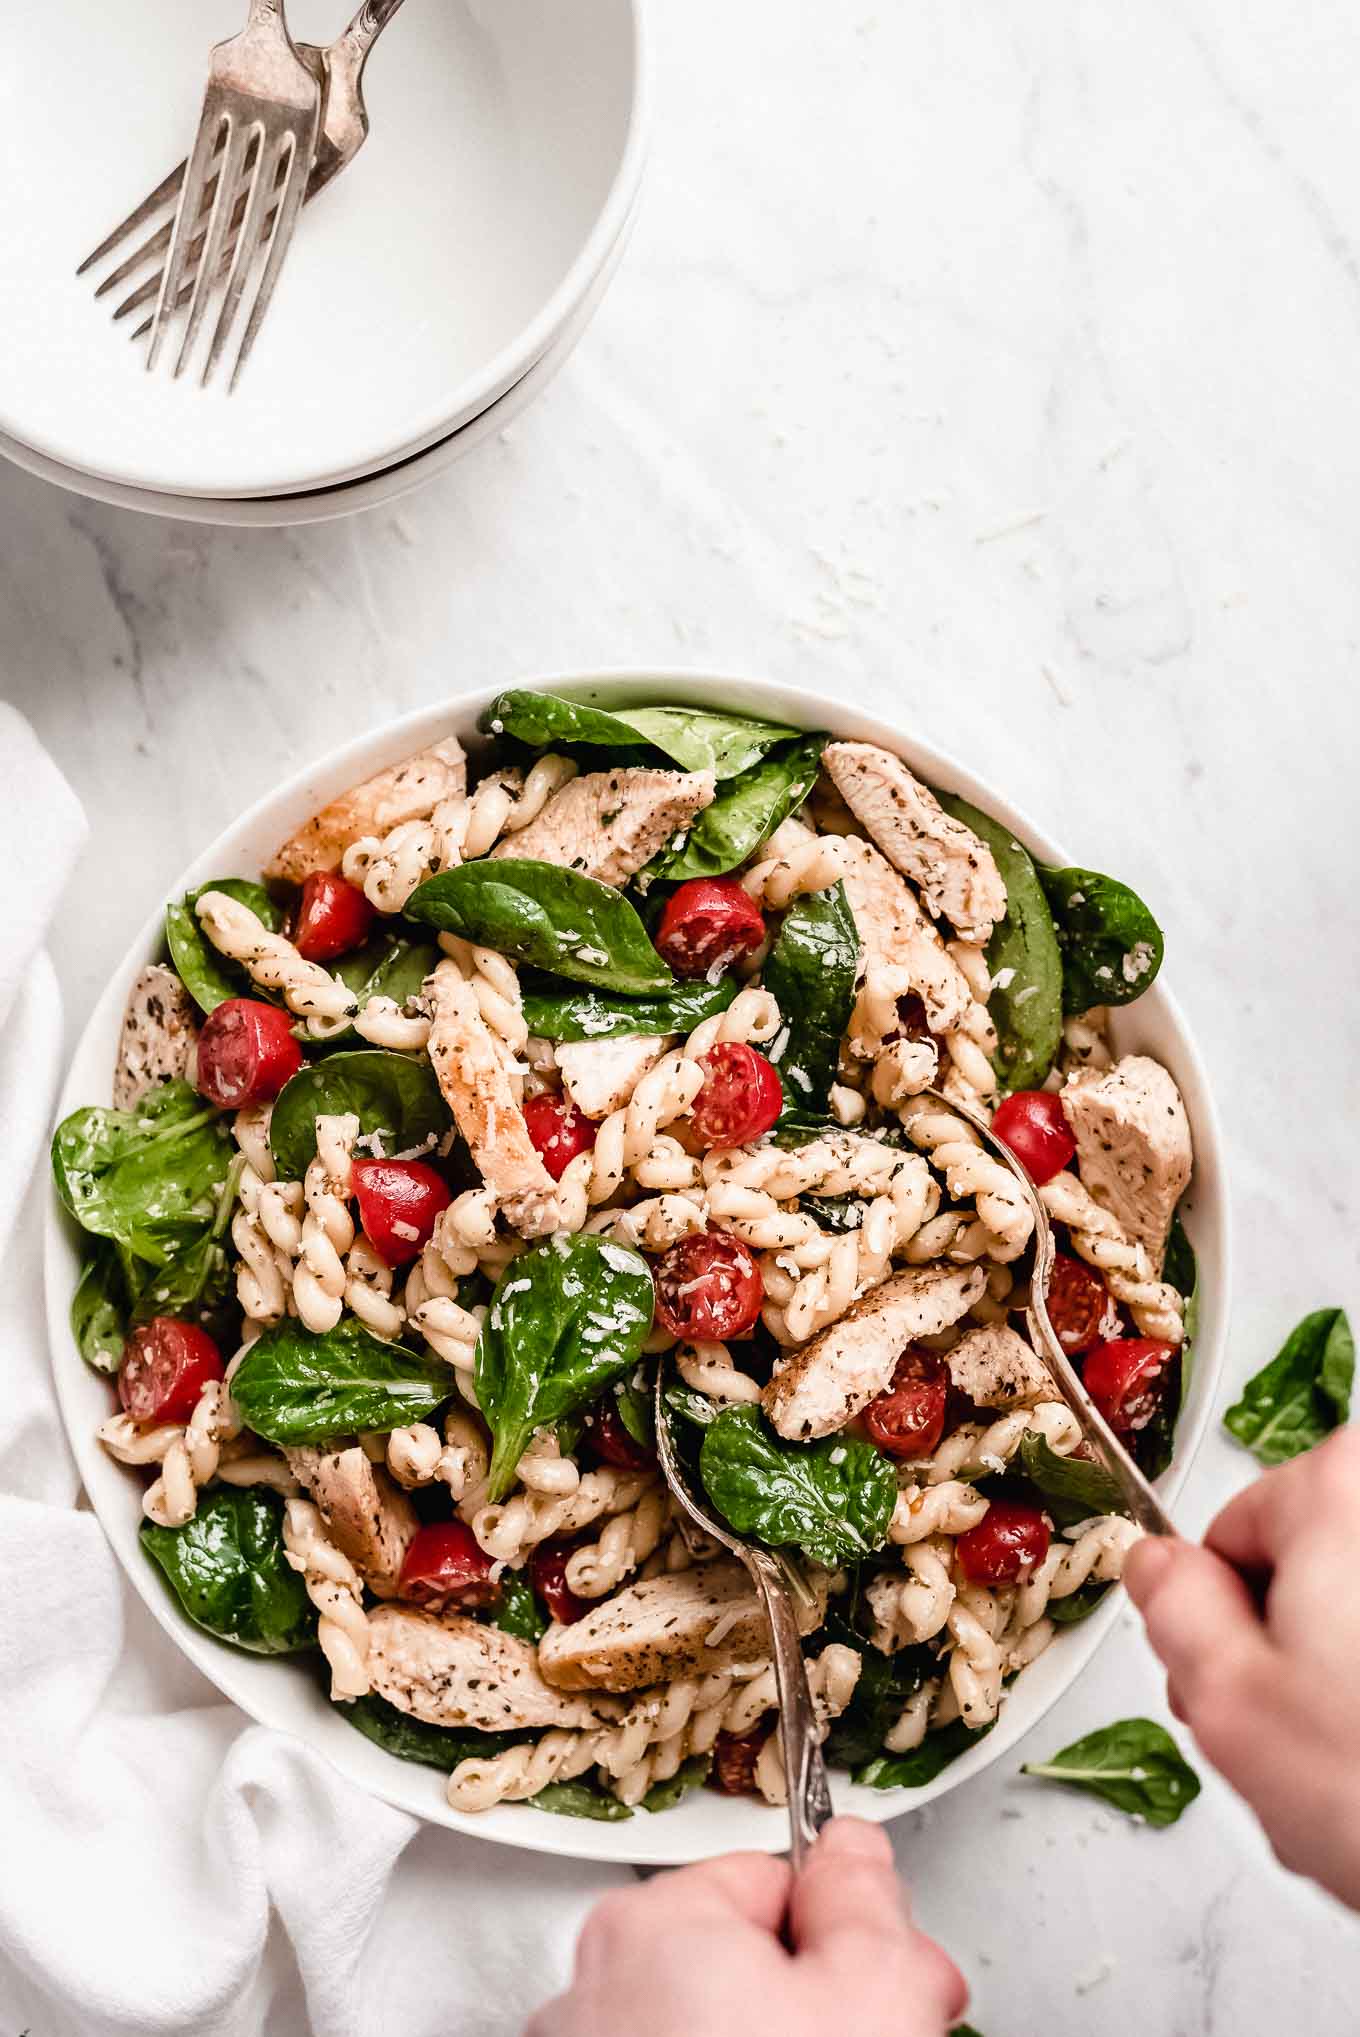  Chicken Pasta Salad in a large bowl. Hands holding two spoons to lift a portion out of the bowl.